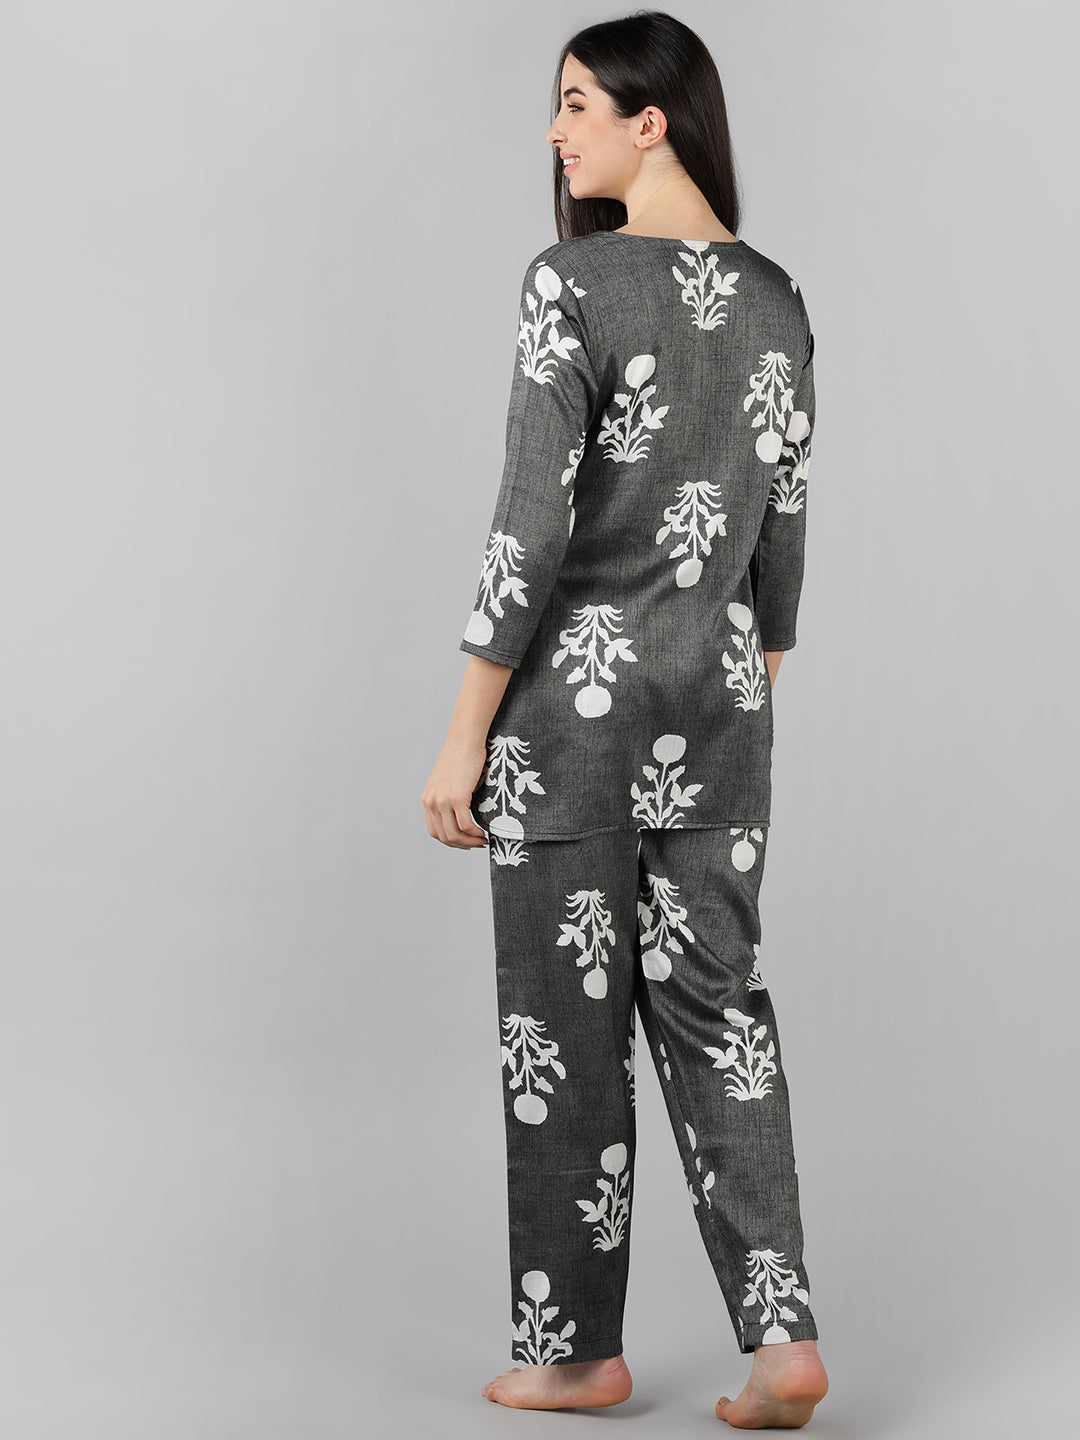 Women's Grey Cotton Floral Printed Night Suit  - Ahika